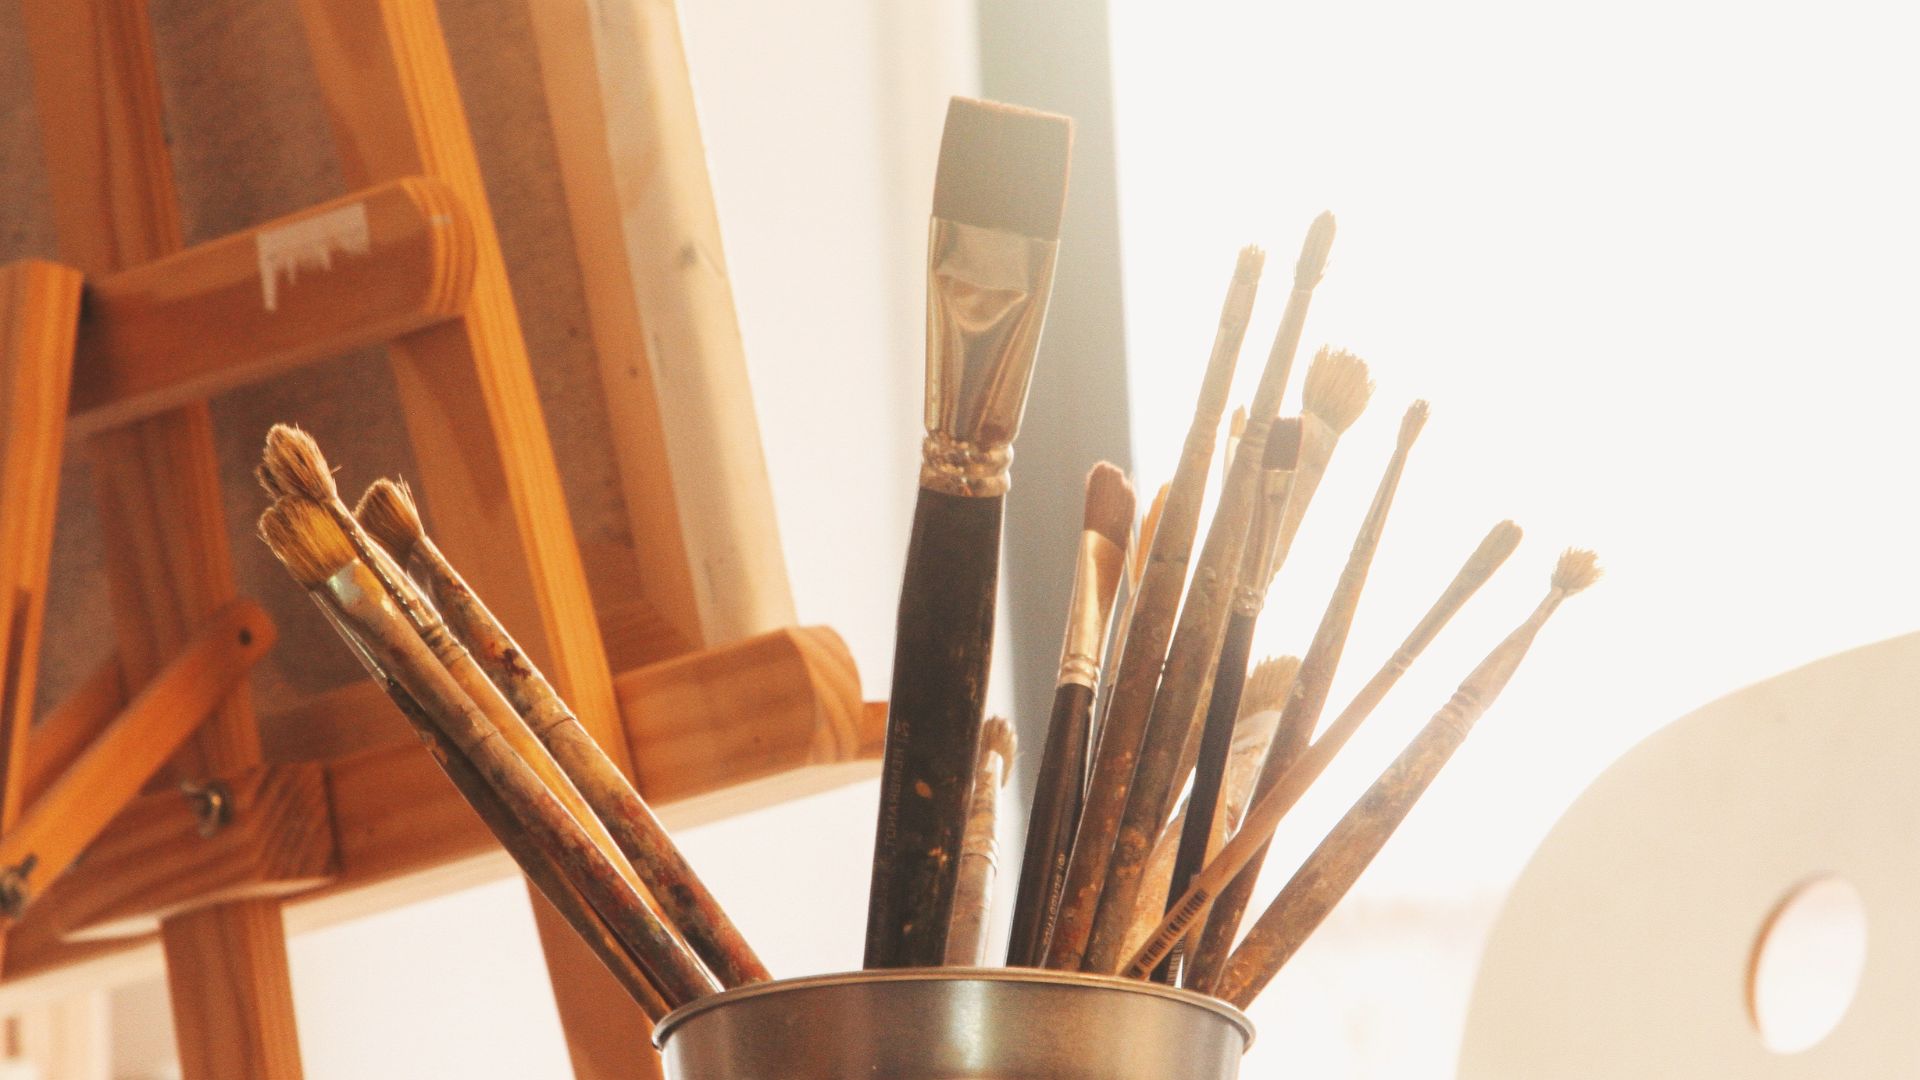 An easel, can of paint brushes, and palette.